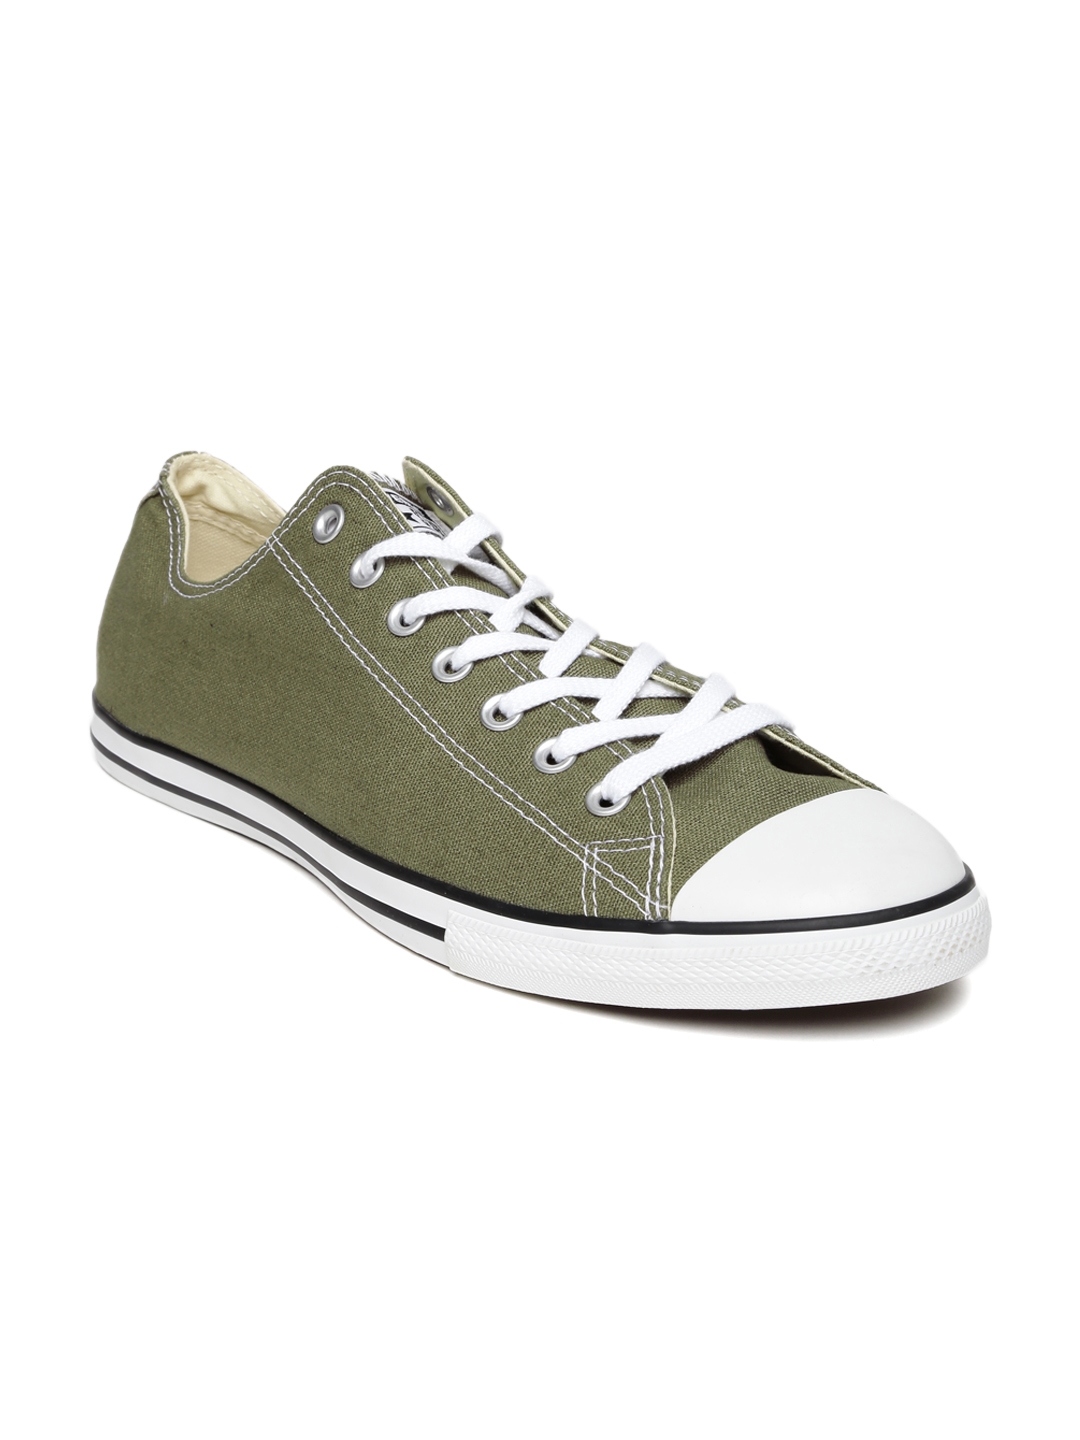 Buy Converse Unisex Olive Green Chuck Taylor Sneakers - Casual Shoes for  Unisex 1412178 | Myntra